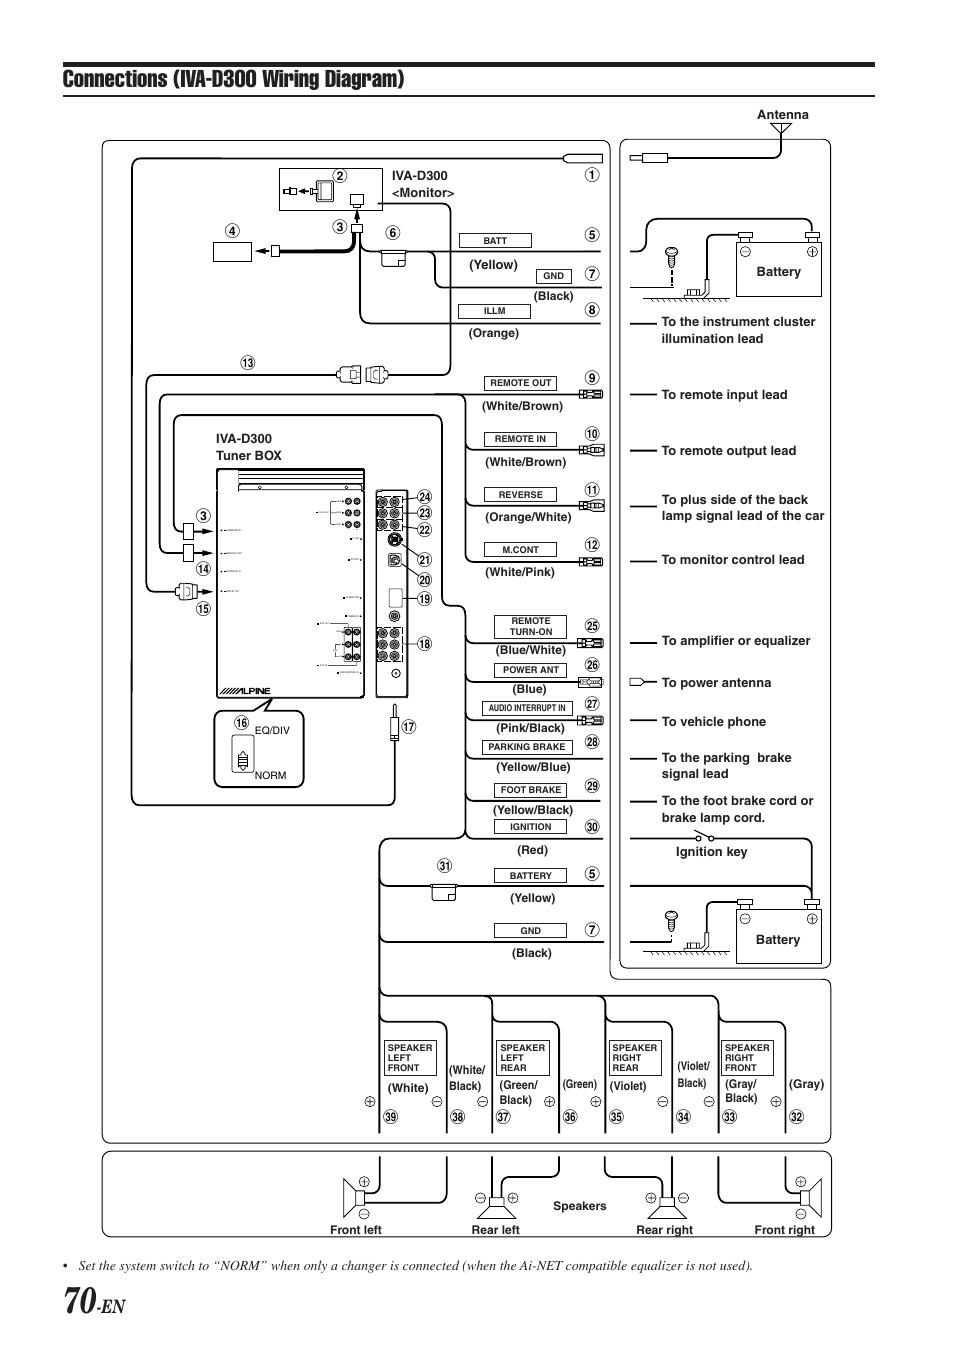 D106 Alpine Wiring Diagram how to wire pioneer 8200 